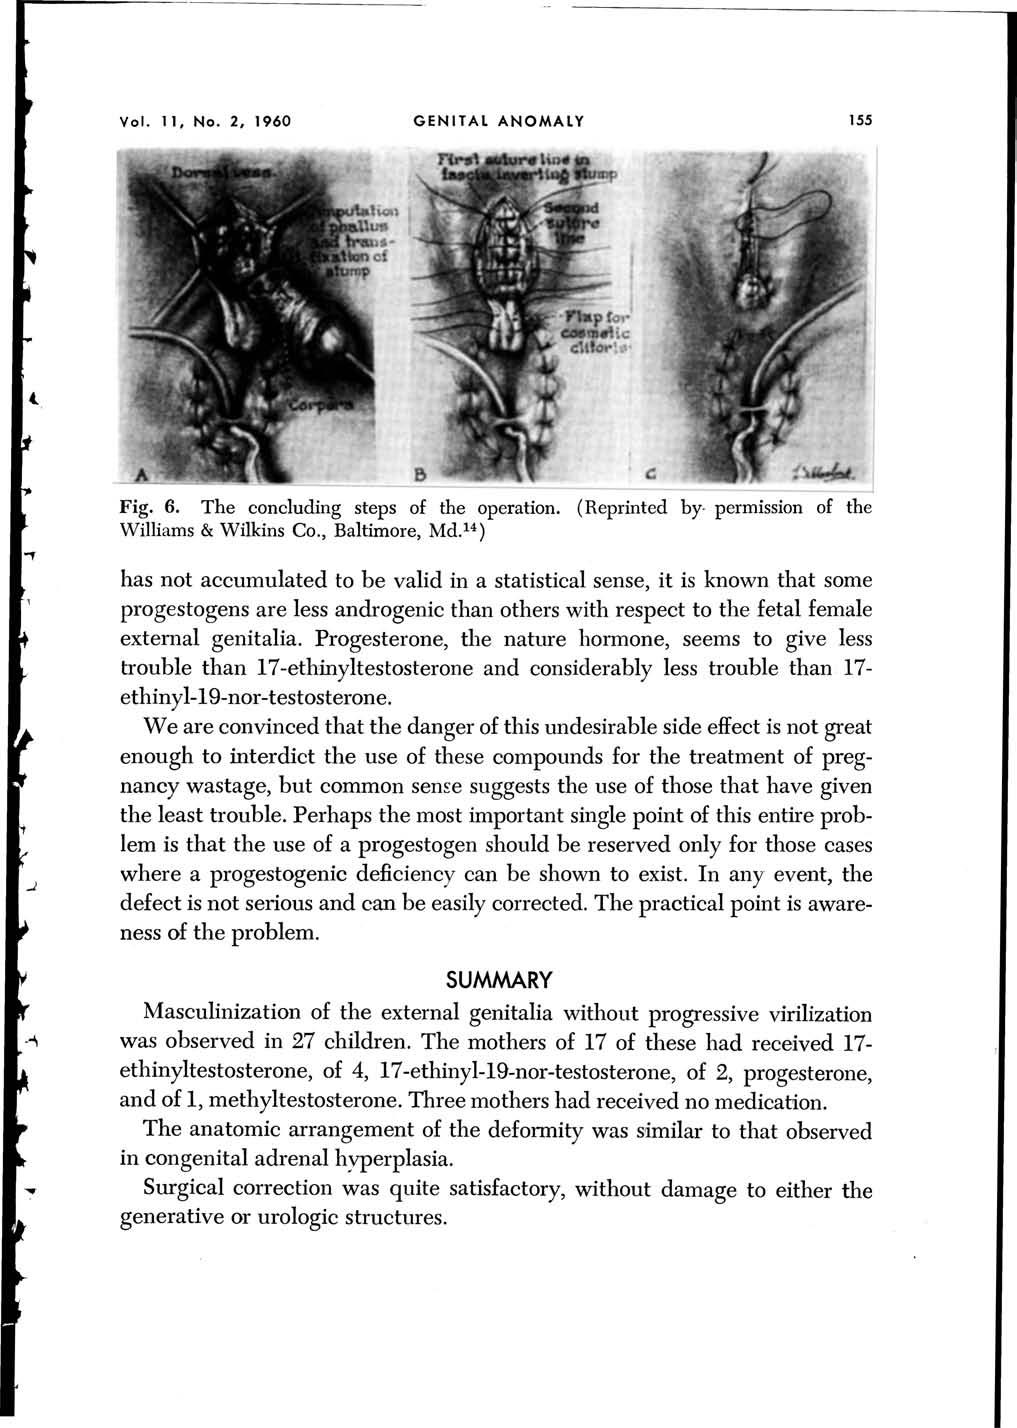 Vol. 11, No.2, 1960 GENITAL ANOMALY 155 Fig. 6. The concluding steps of the operation. (Reprinted by- permission of the Williams & Wilkins Co., Baltimore, Md.